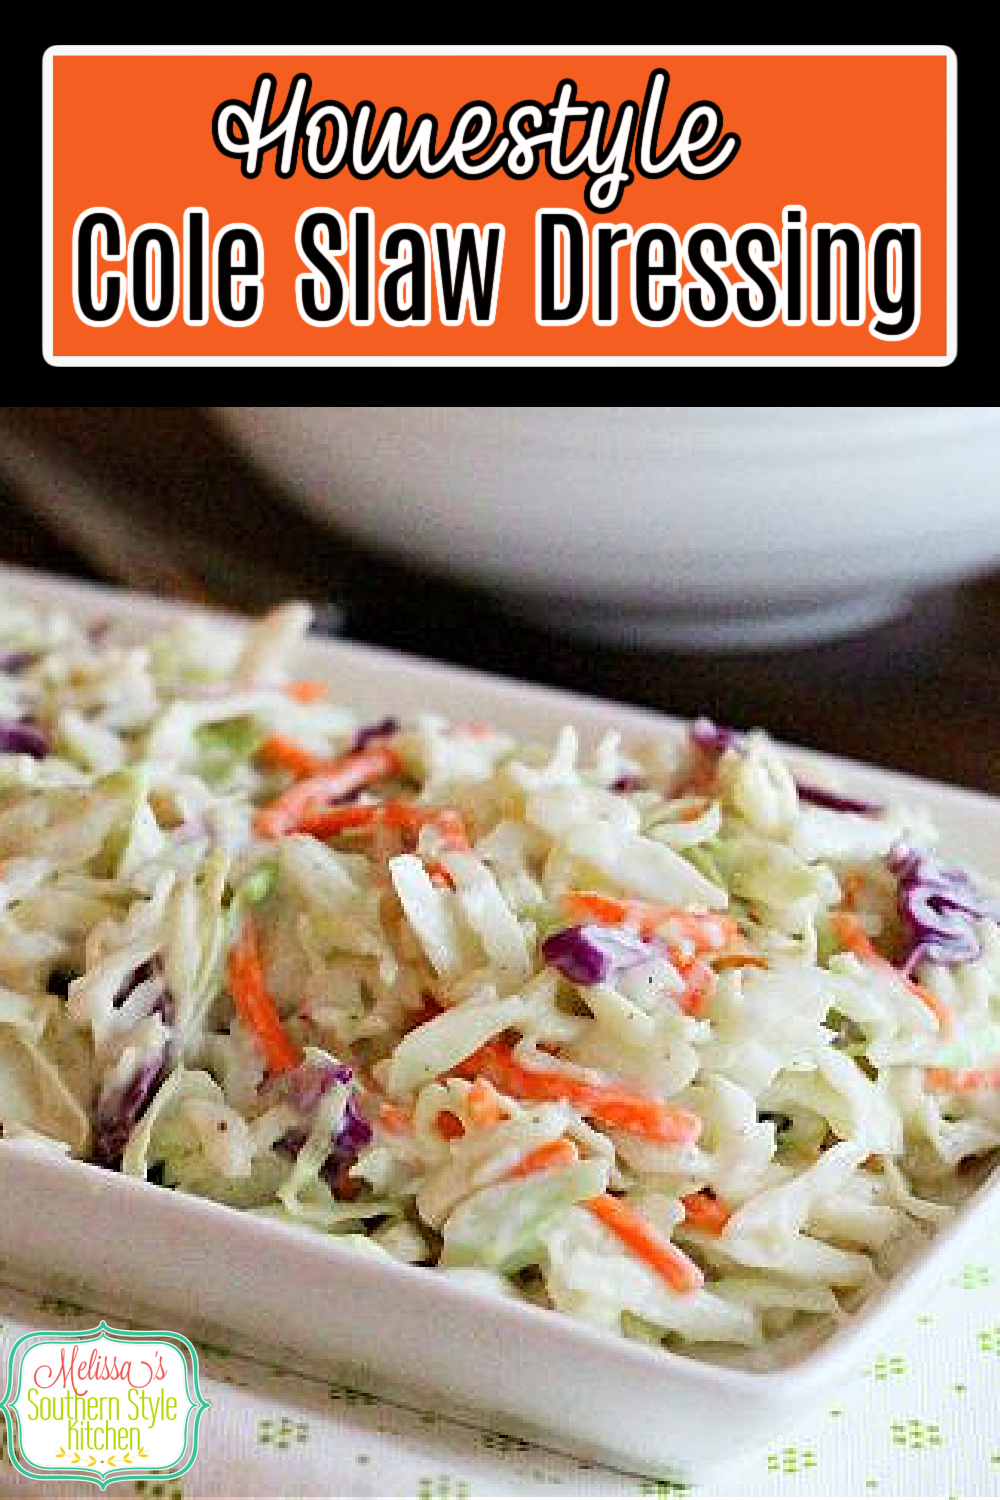 This dreamy homemade cole slaw dressing comes together in a snap #coleslaw #saladdressings #coleslawrecipes #dressings #sidedishrecipes #slaw #southerncoleslaw #bbqfood #southernfood #southernrecipes #dinnerideas